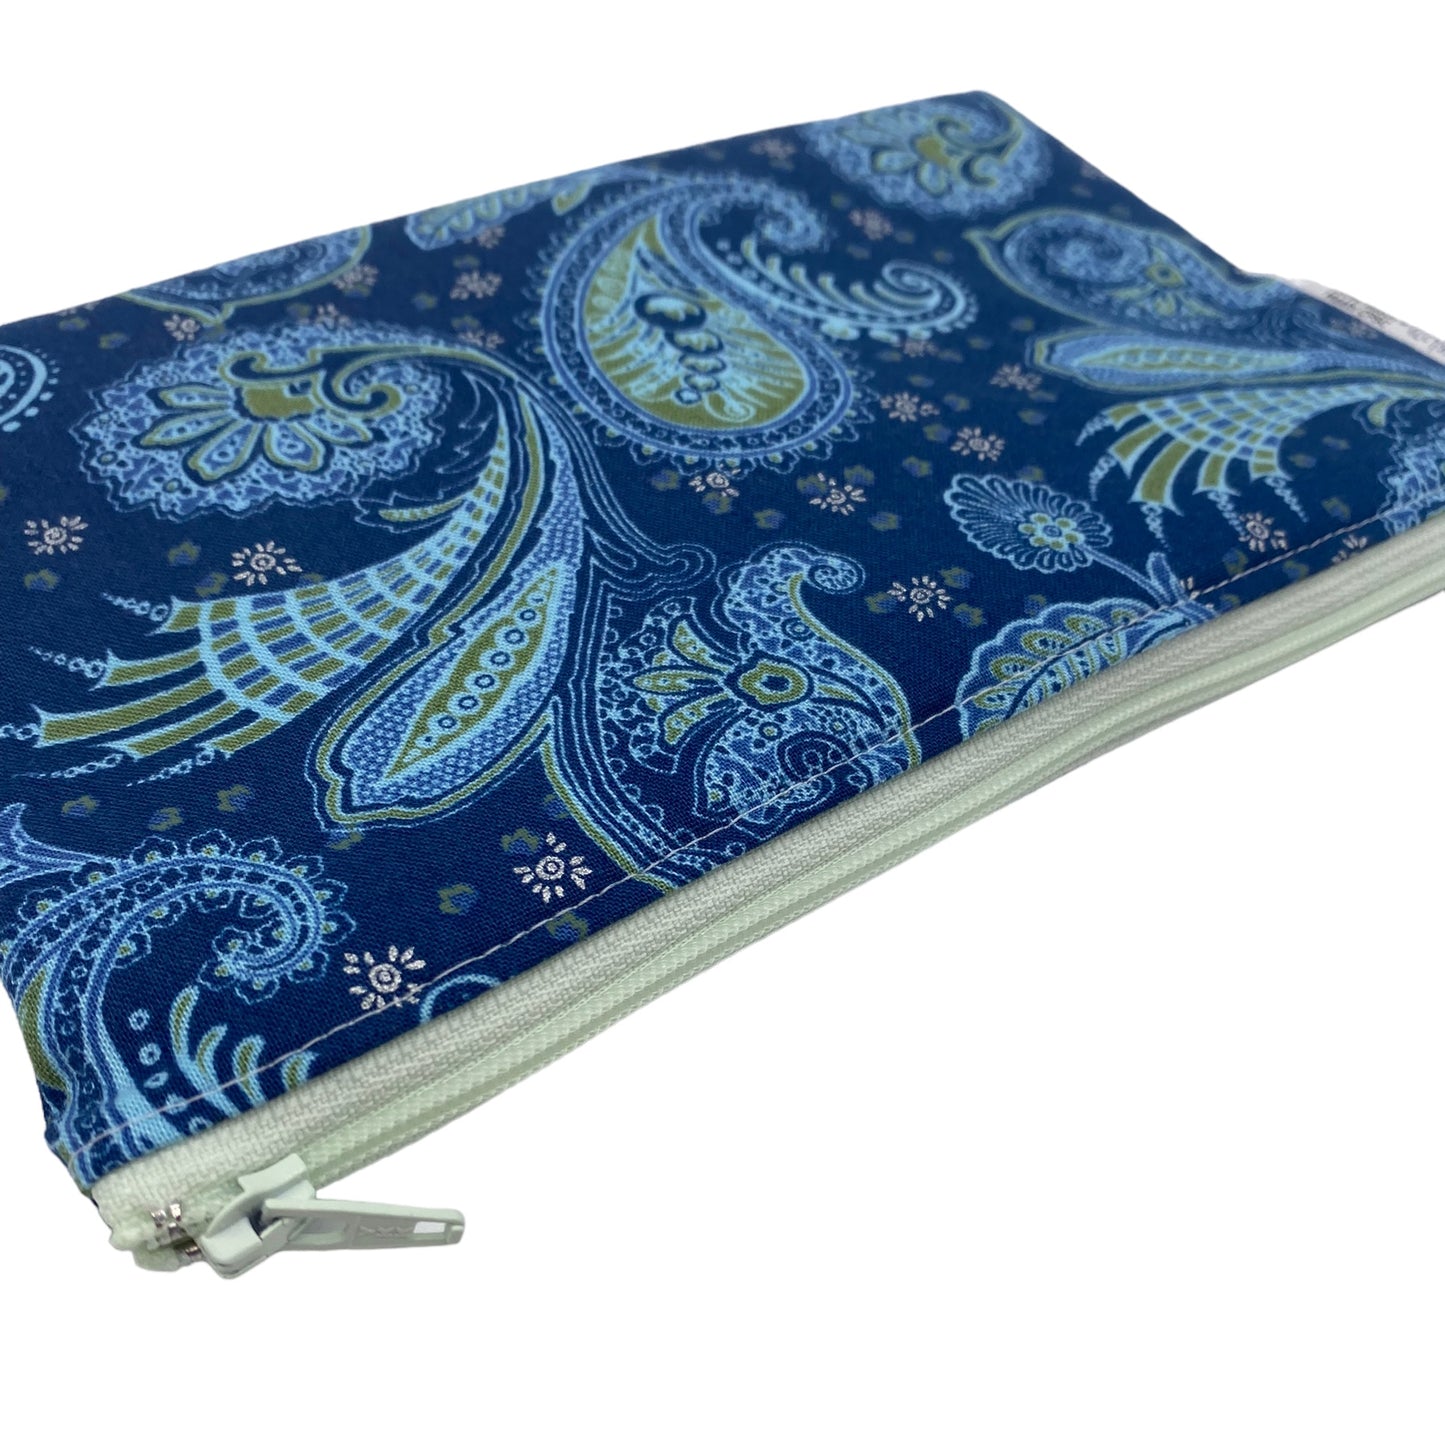 Snack Sized Reusable Zippered Bag Paisley Blue Green Sparkly Silver